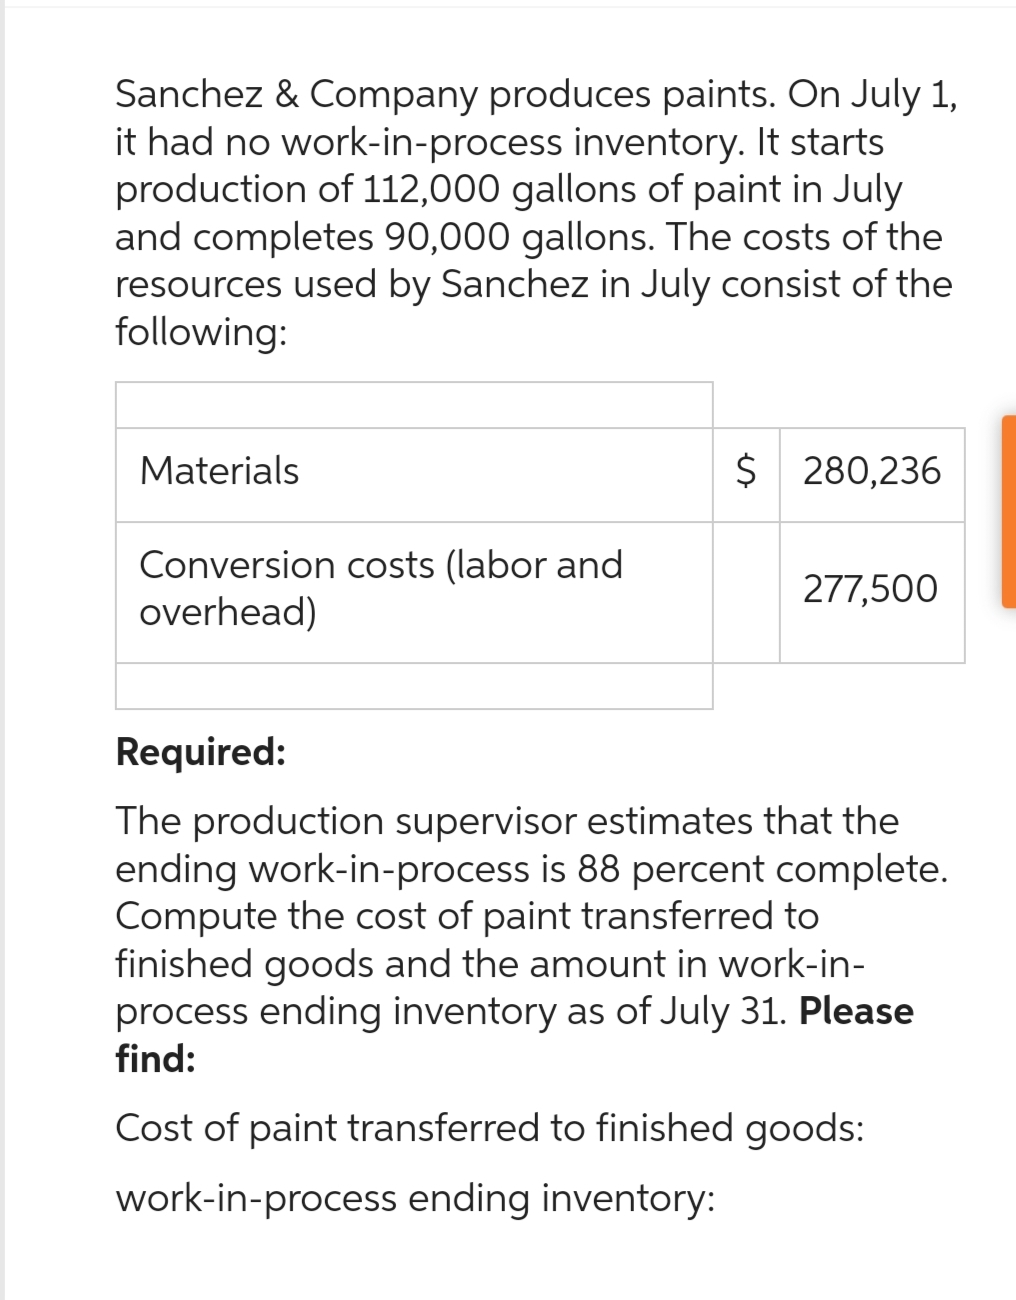 Sanchez & Company produces paints. On July 1,
it had no work-in-process inventory. It starts
production of 112,000 gallons of paint in July
and completes 90,000 gallons. The costs of the
resources used by Sanchez in July consist of the
following:
Materials
Conversion costs (labor and
overhead)
$ 280,236
277,500
Required:
The production supervisor estimates that the
ending work-in-process is 88 percent complete.
Compute the cost of paint transferred to
finished goods and the amount in work-in-
process ending inventory as of July 31. Please
find:
Cost of paint transferred to finished goods:
work-in-process ending inventory: